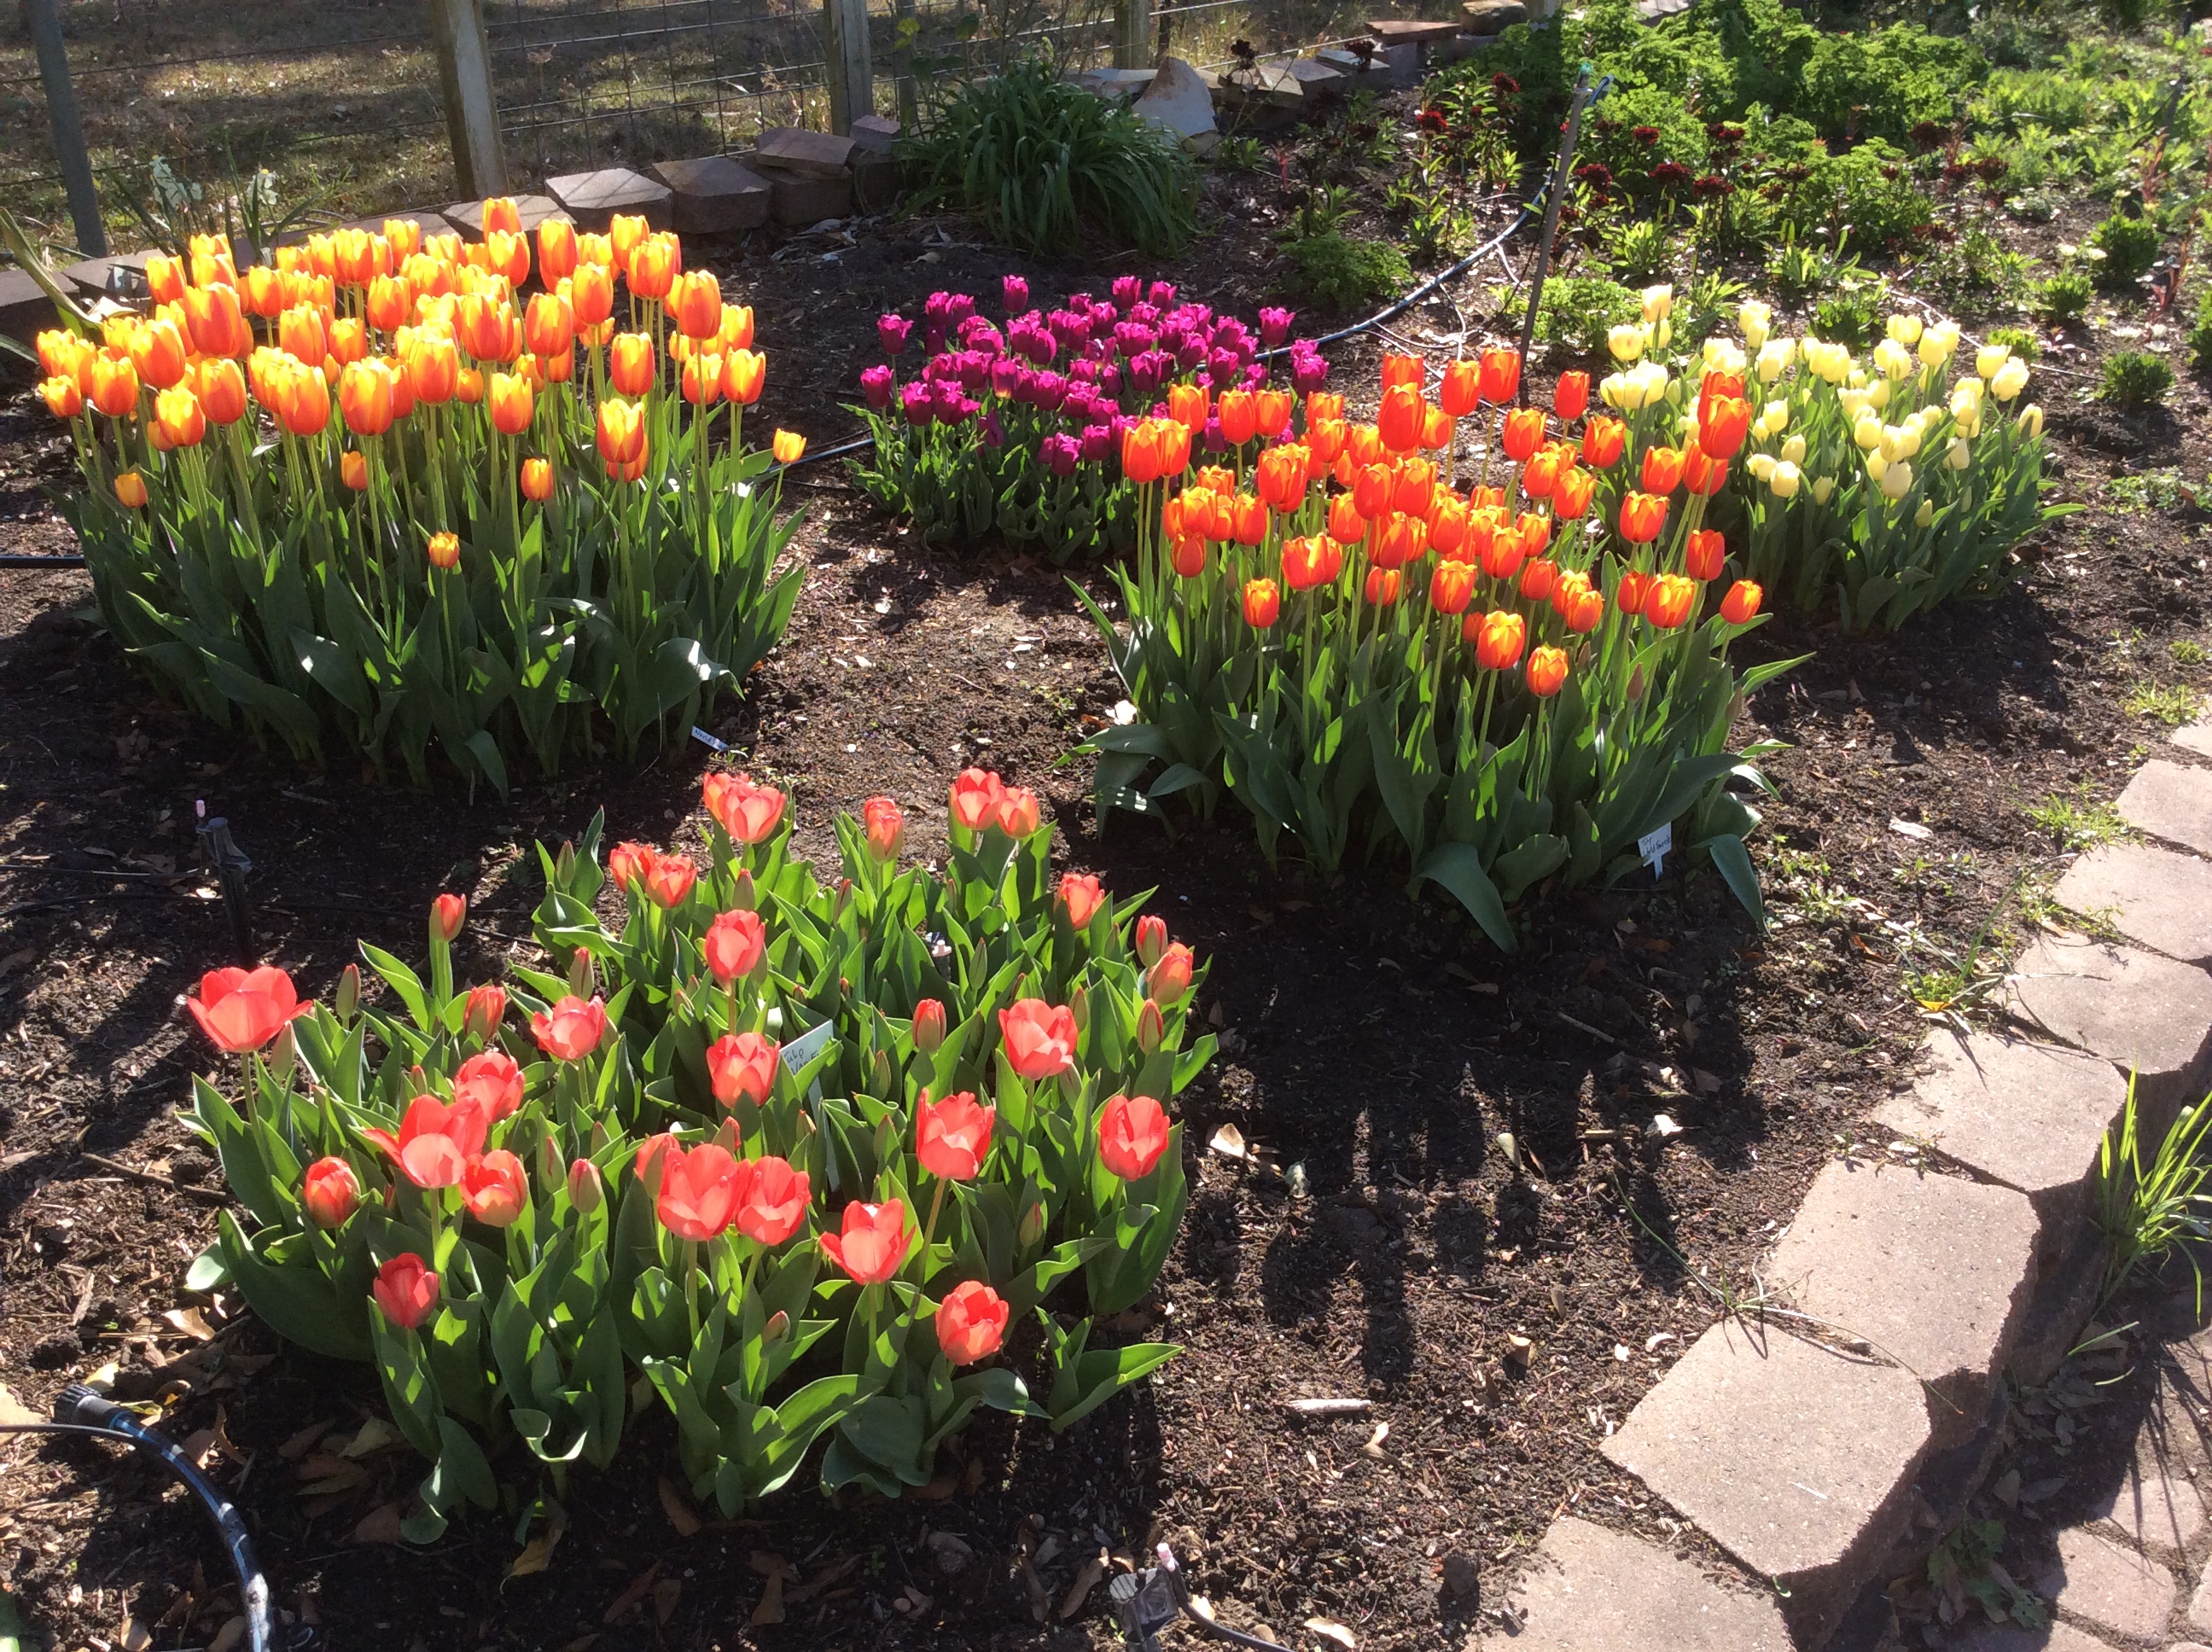 Tulips for Harris County | Harris County Horticulture Blog